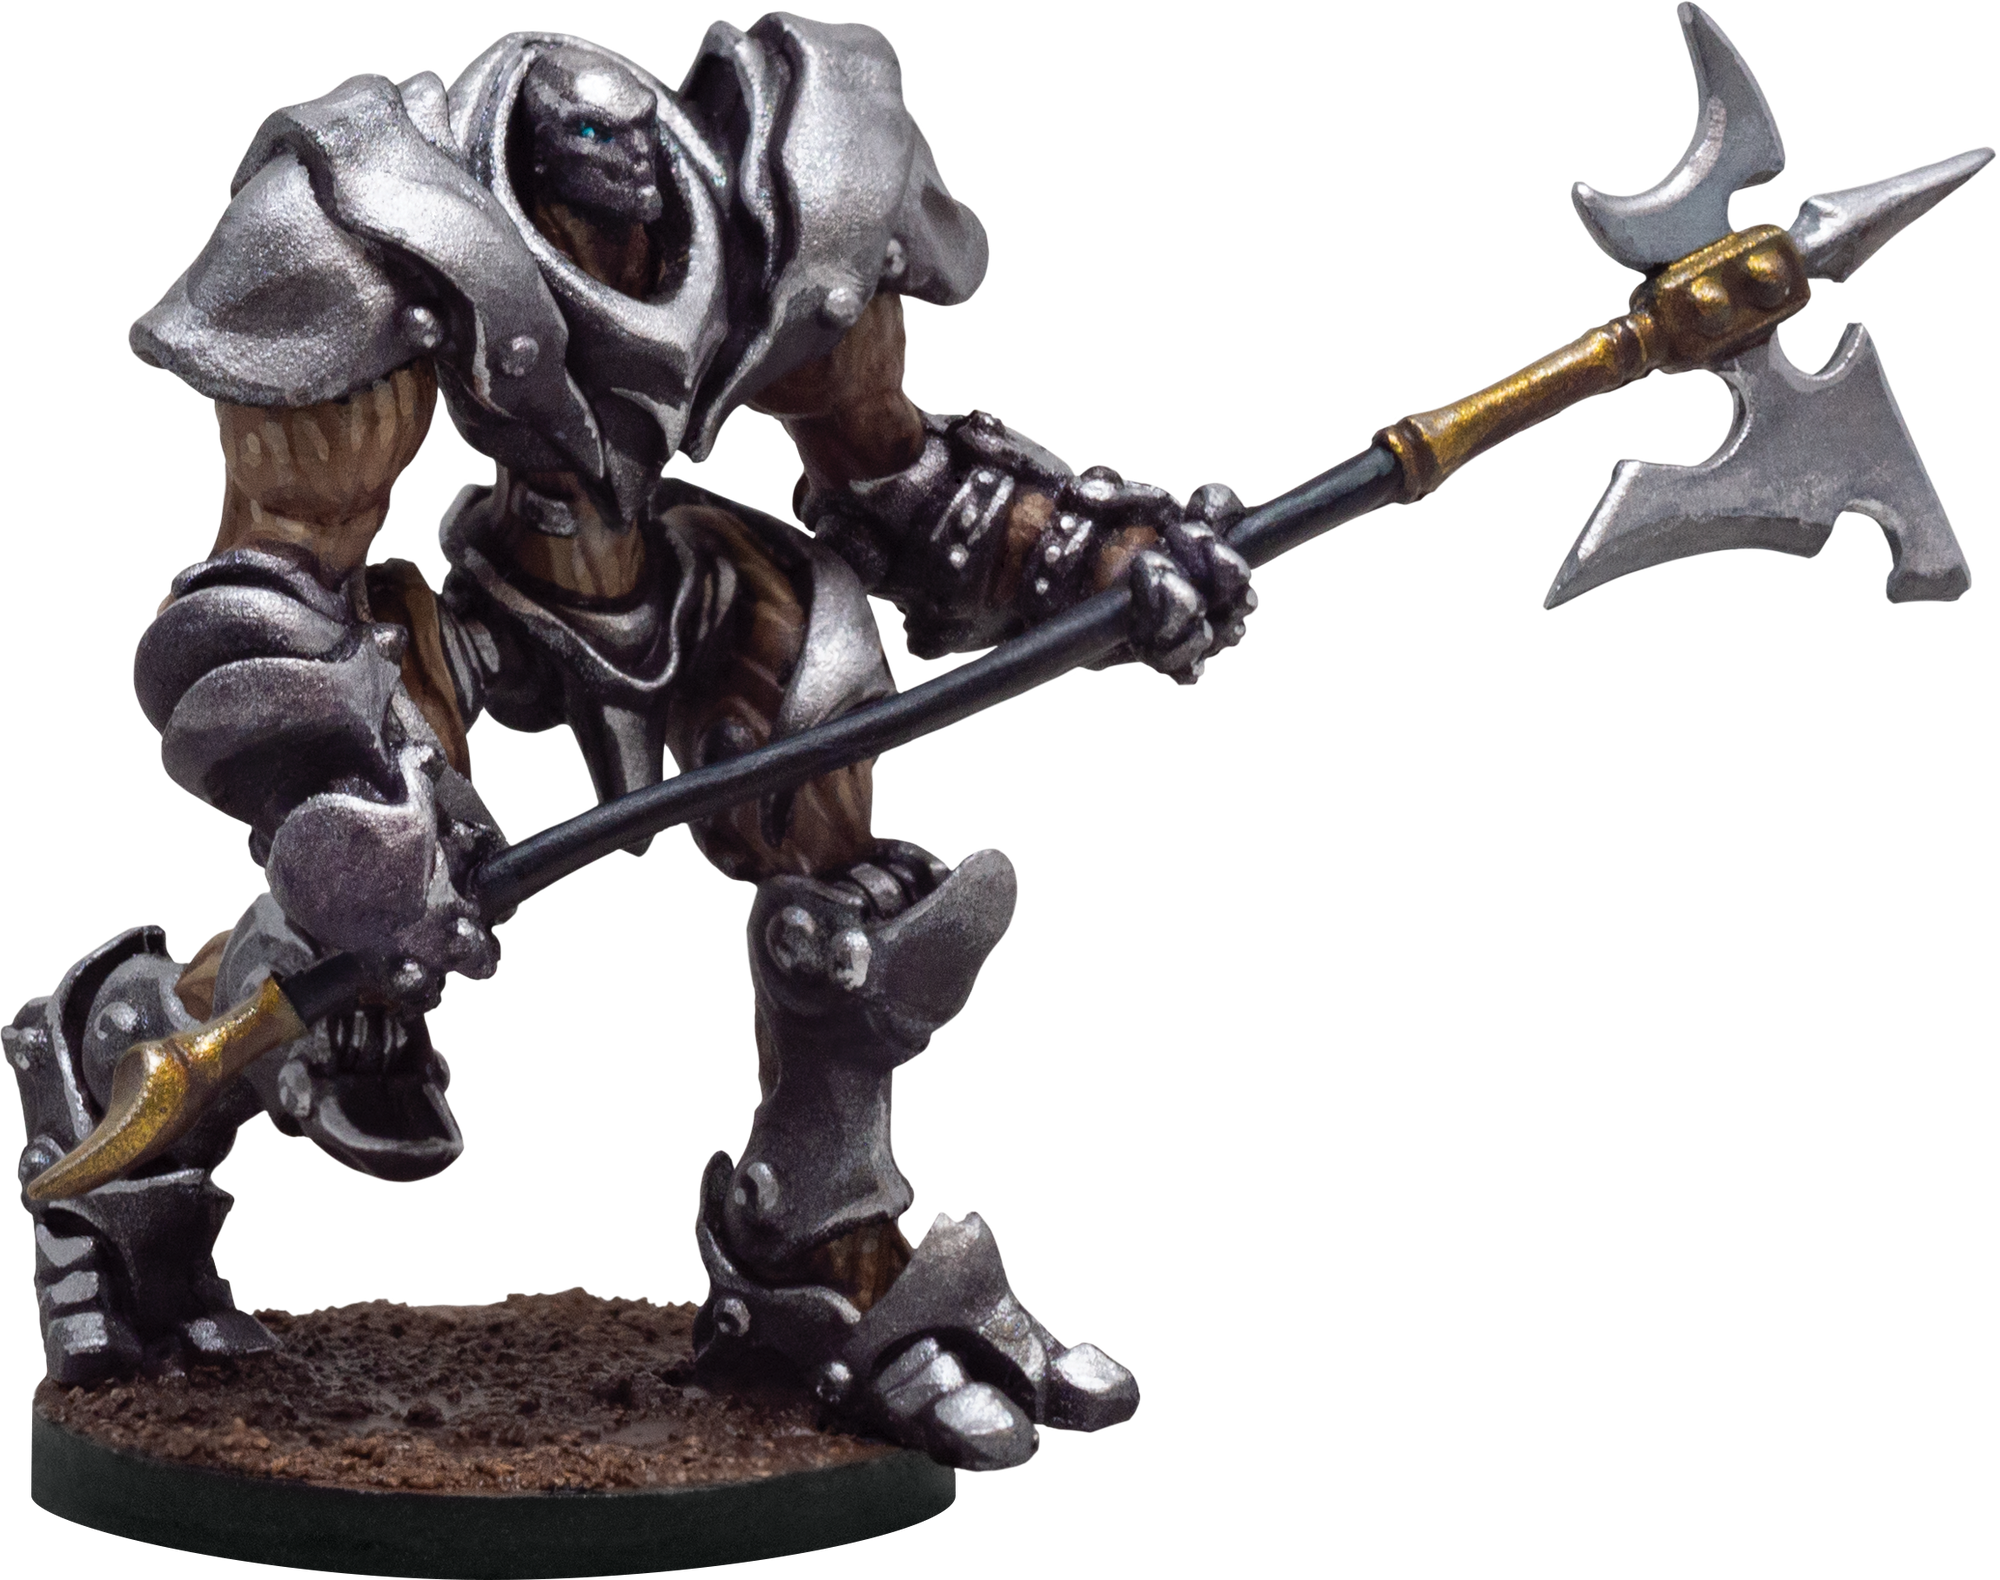 Bulwark - The Forged 28mm Miniature by Adventurers & Adversaries